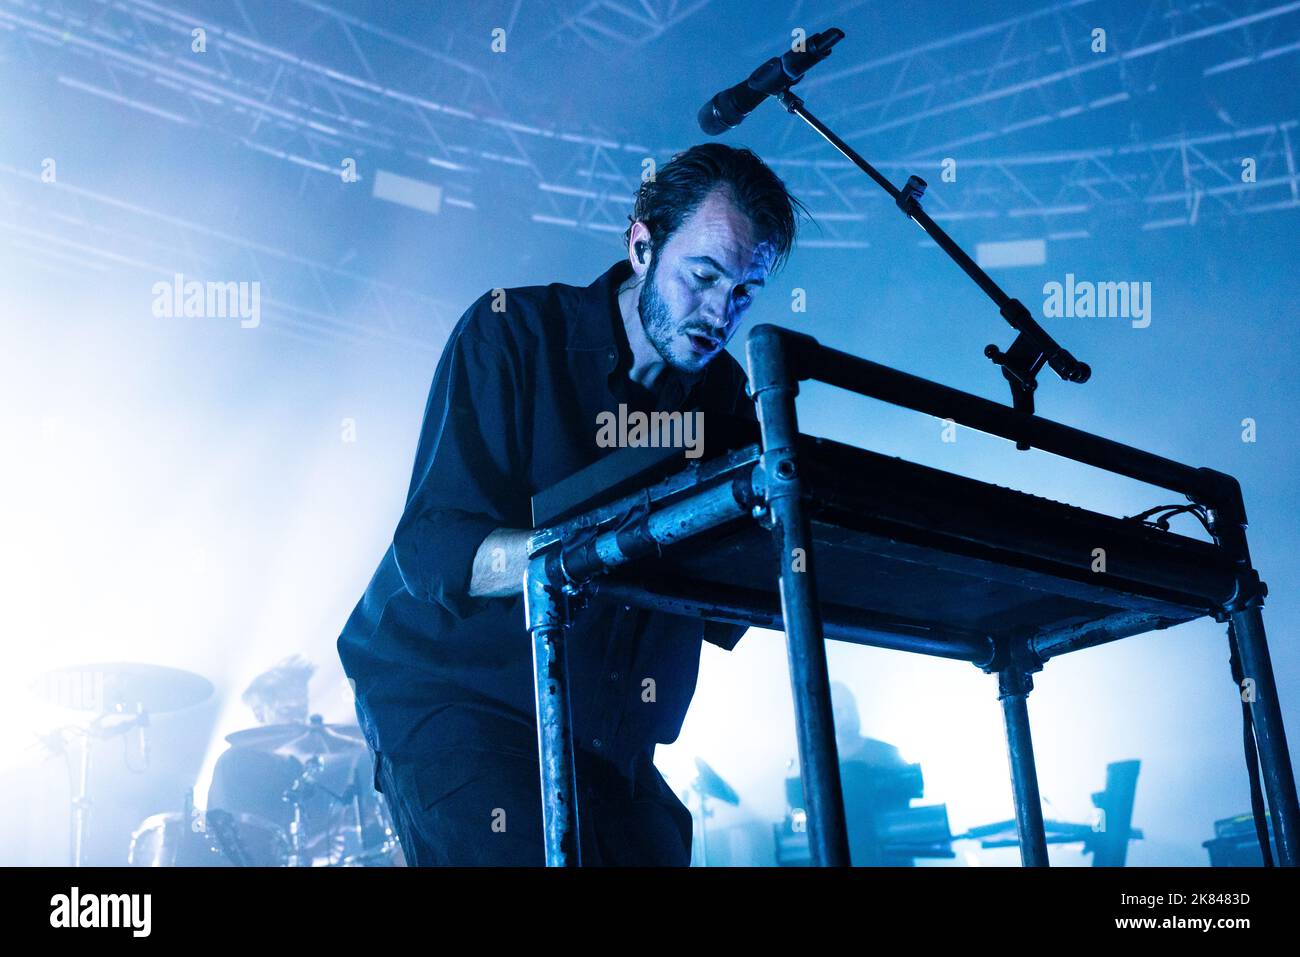 Milan, Italy. 20th Oct, 2022. 20th October 2022. Editors in concert at Fabrique Milano, Italy. Credits: Marco Arici/Alamy live news Credit: Marco Arici/Alamy Live News Stock Photo